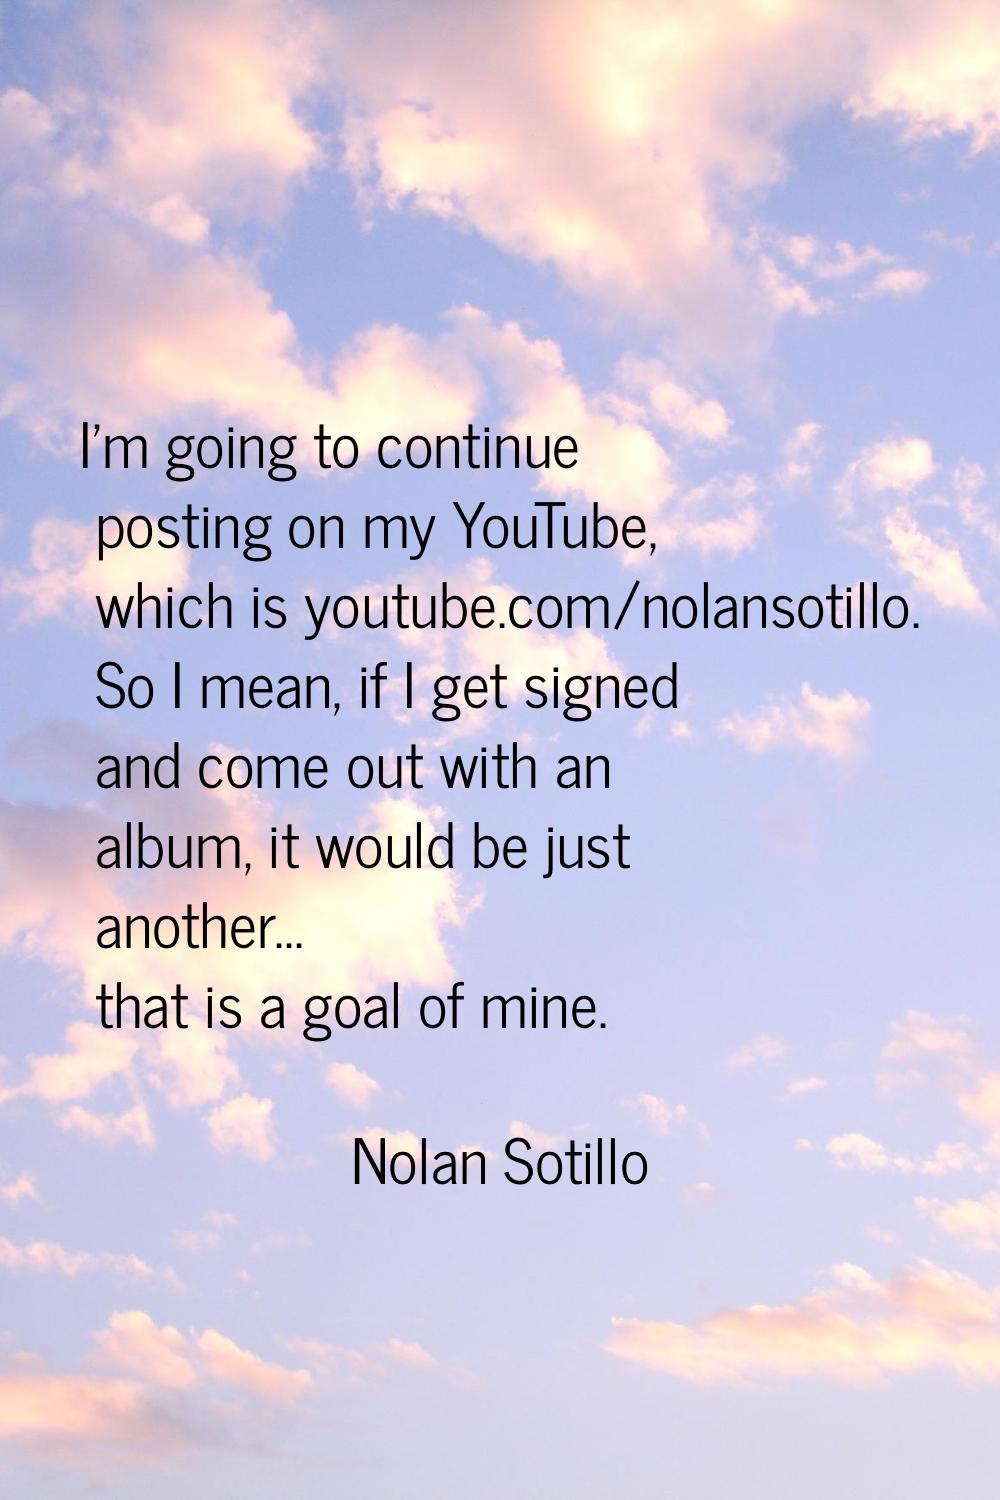 I'm going to continue posting on my YouTube, which is youtube.com/nolansotillo. So I mean, if I get